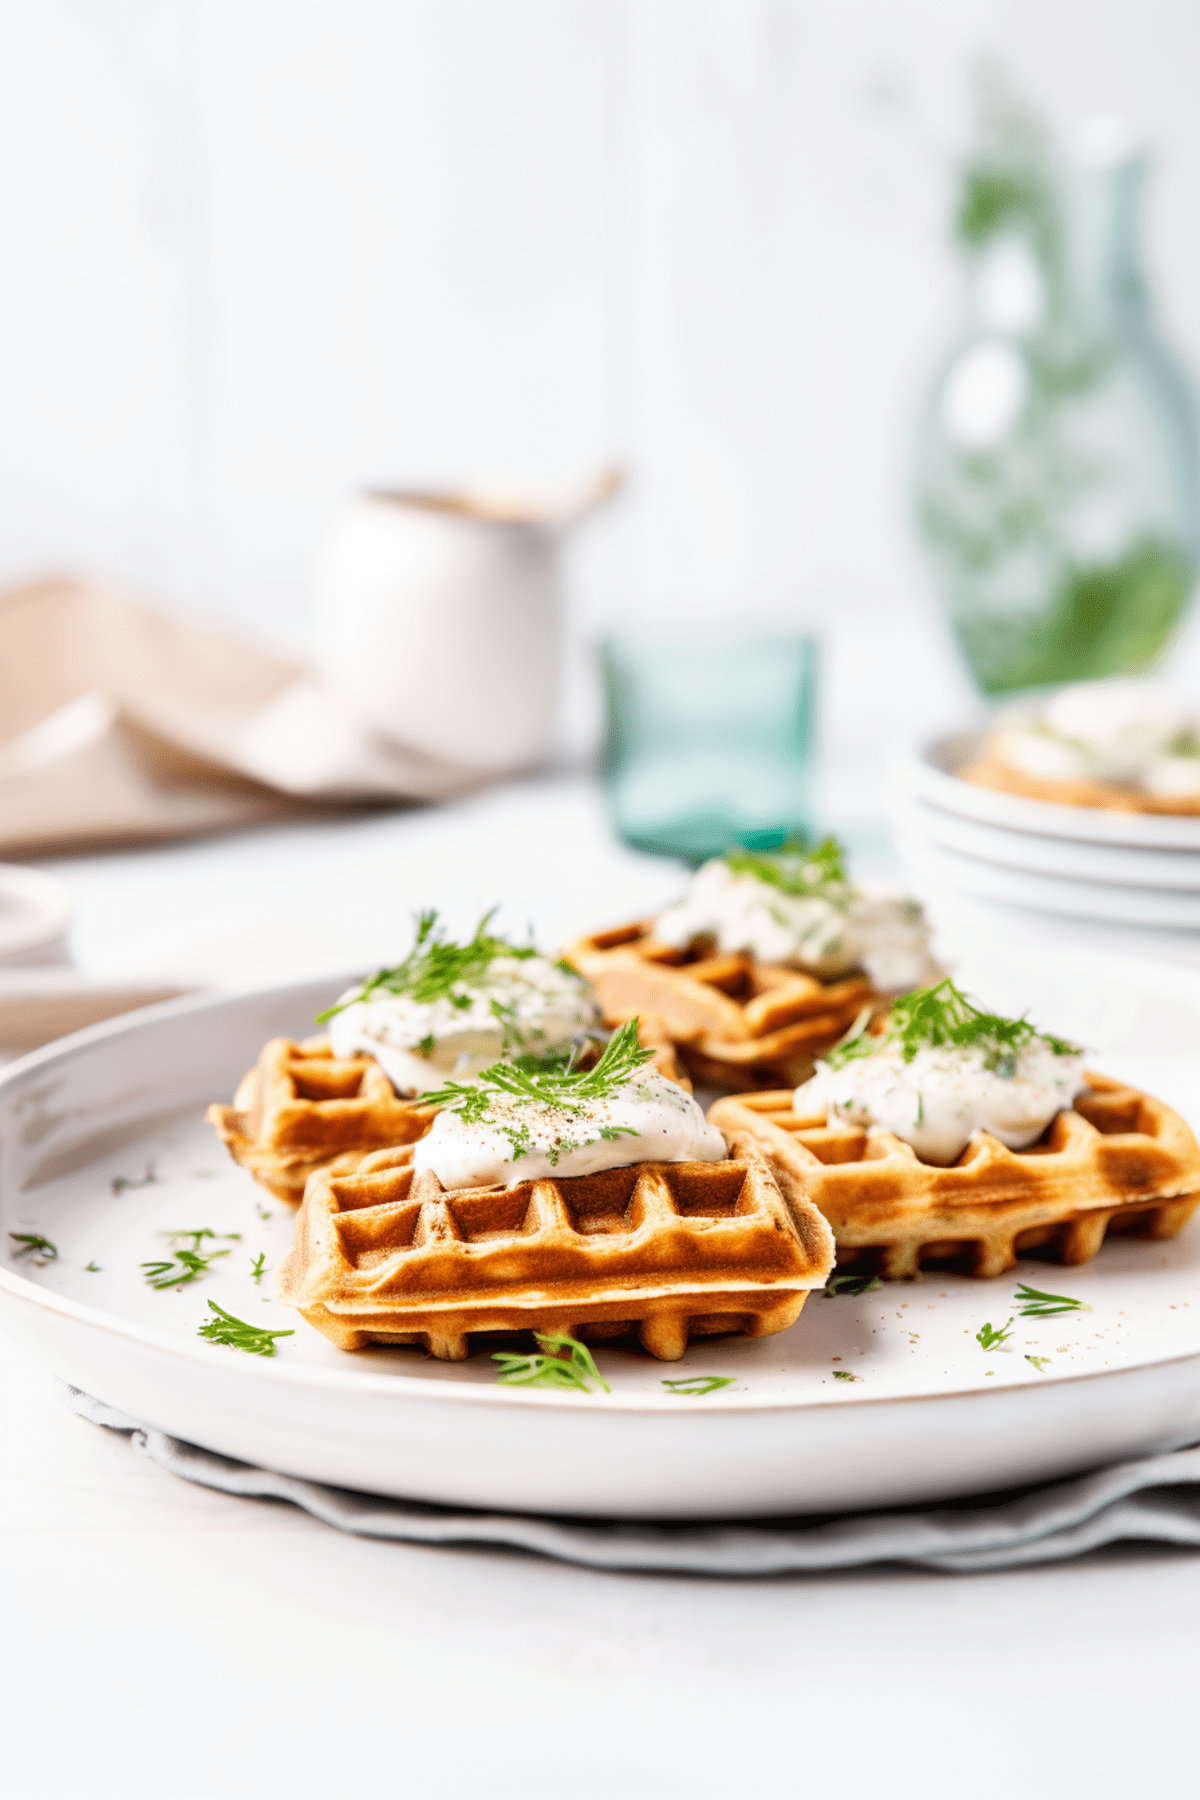 Cream Cheese Chaffles - The Best Keto Recipes